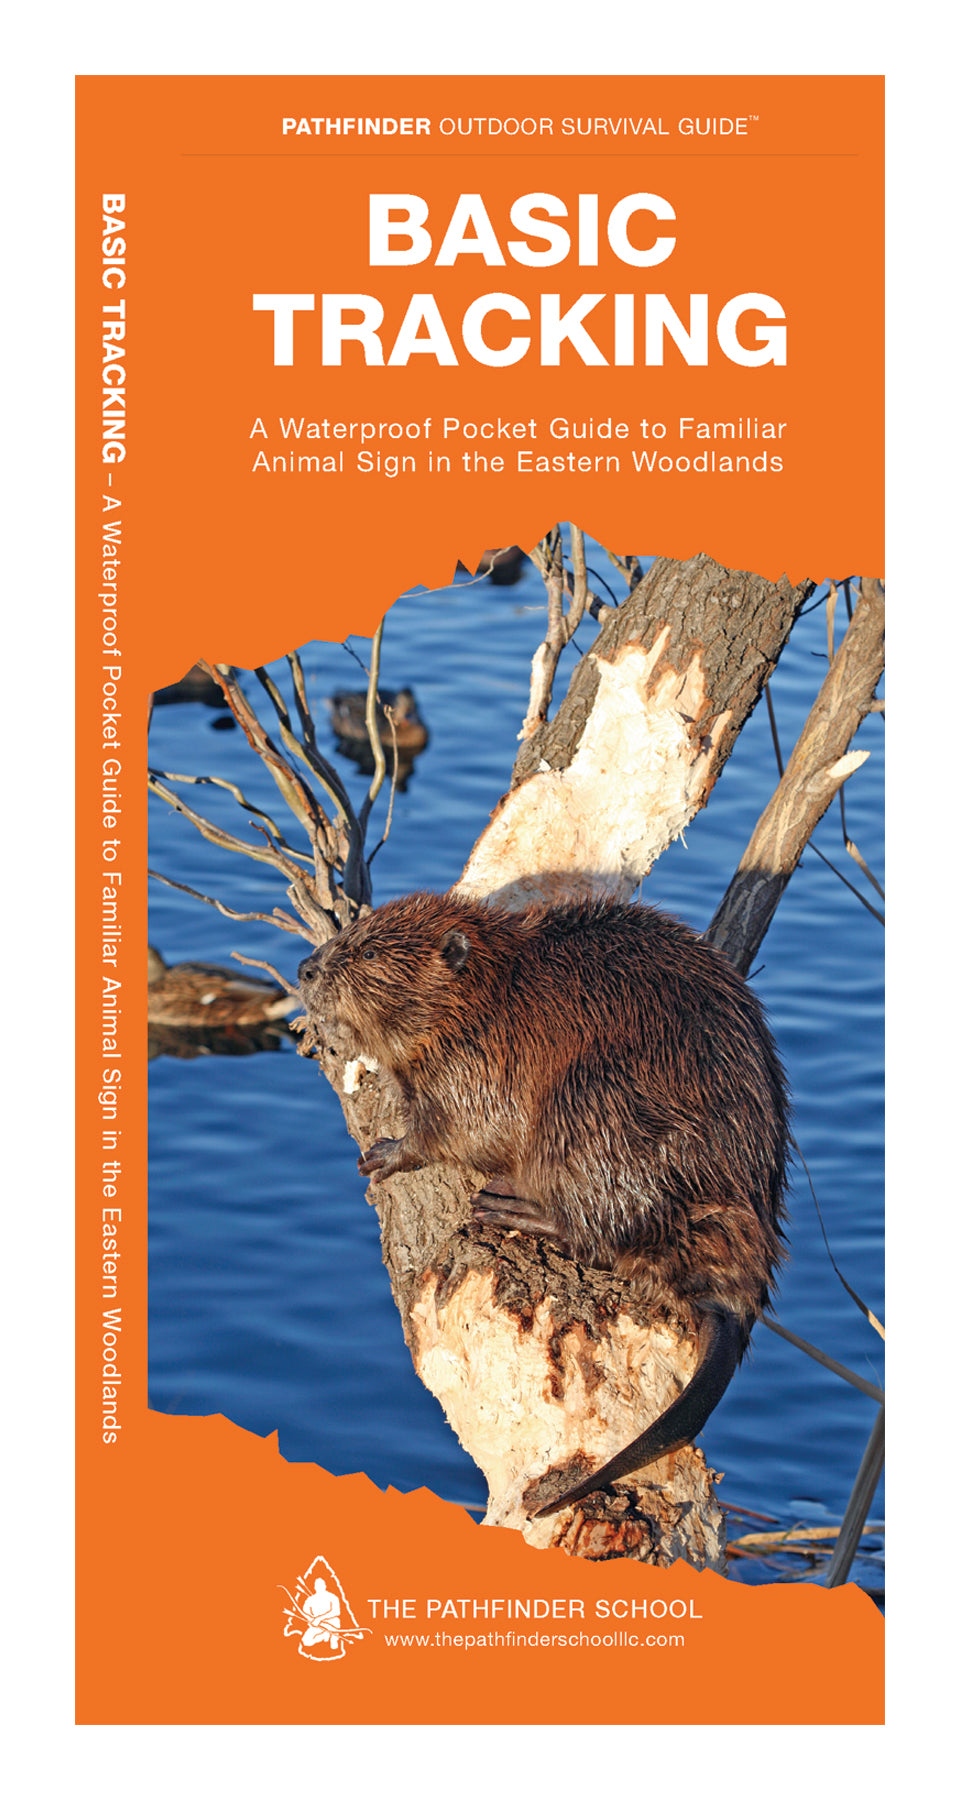 Basic Tracking - A Waterproof Pocket Guide to Familiar Animal Sign in the Eastern Woodlands